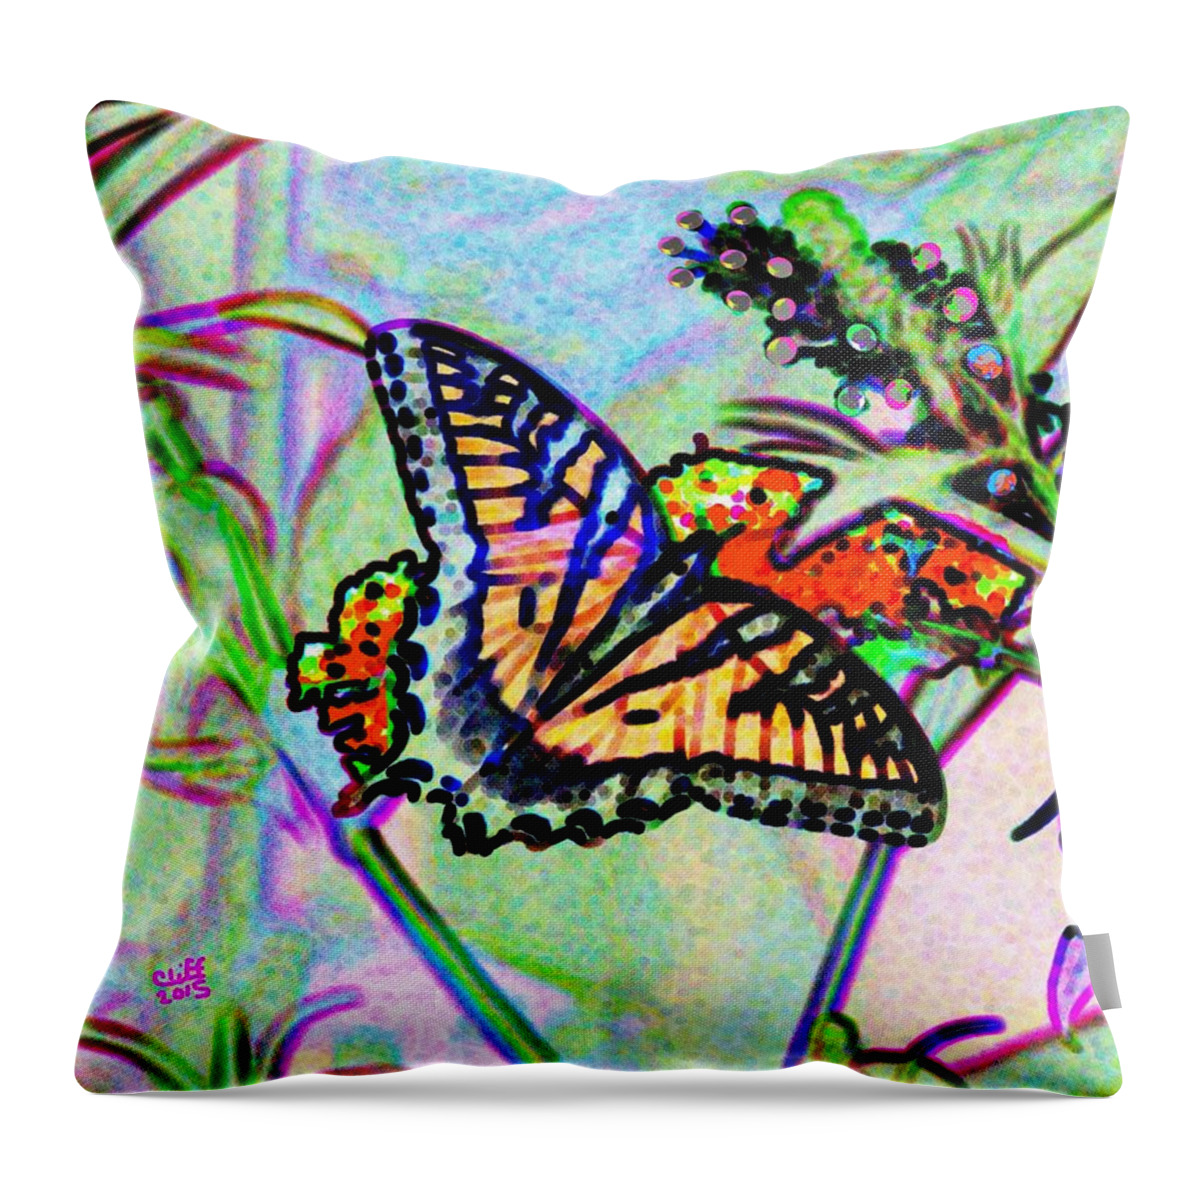 Butterfly Throw Pillow featuring the painting Butterfly by Cliff Wilson